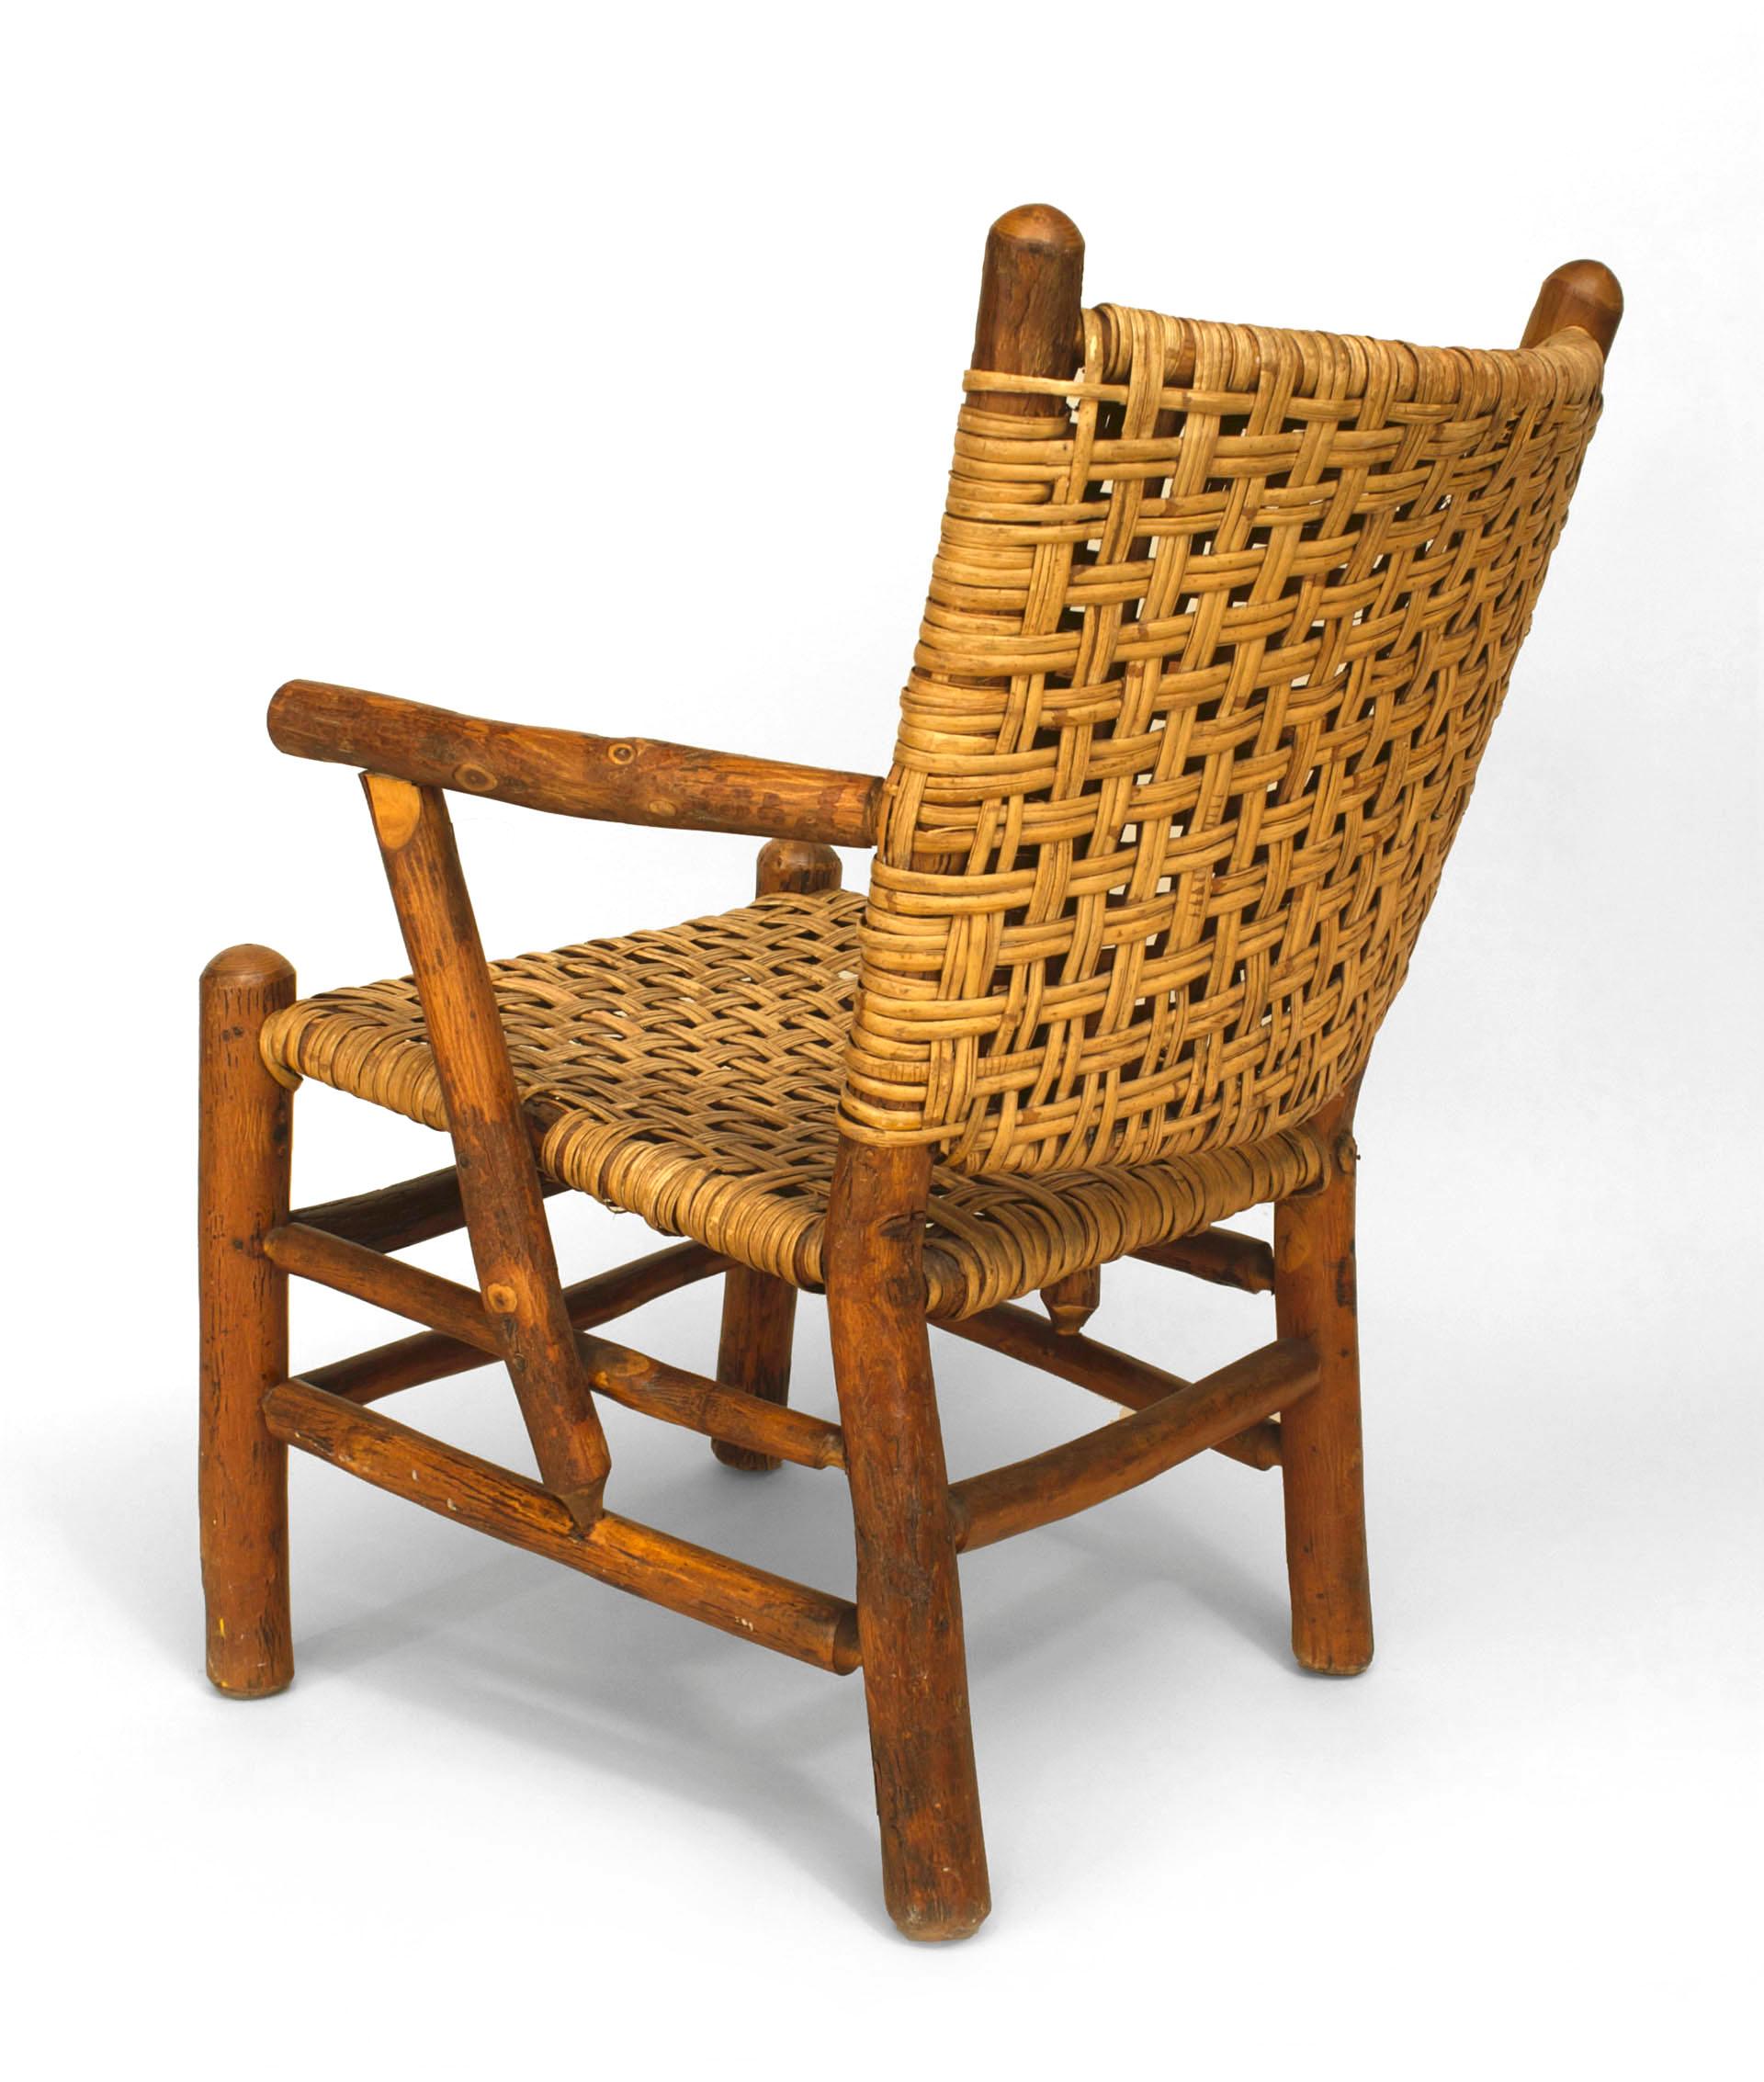 Mid-20th Century Pair of 1940's American Rustic Armchairs by the Old Hickory Co.